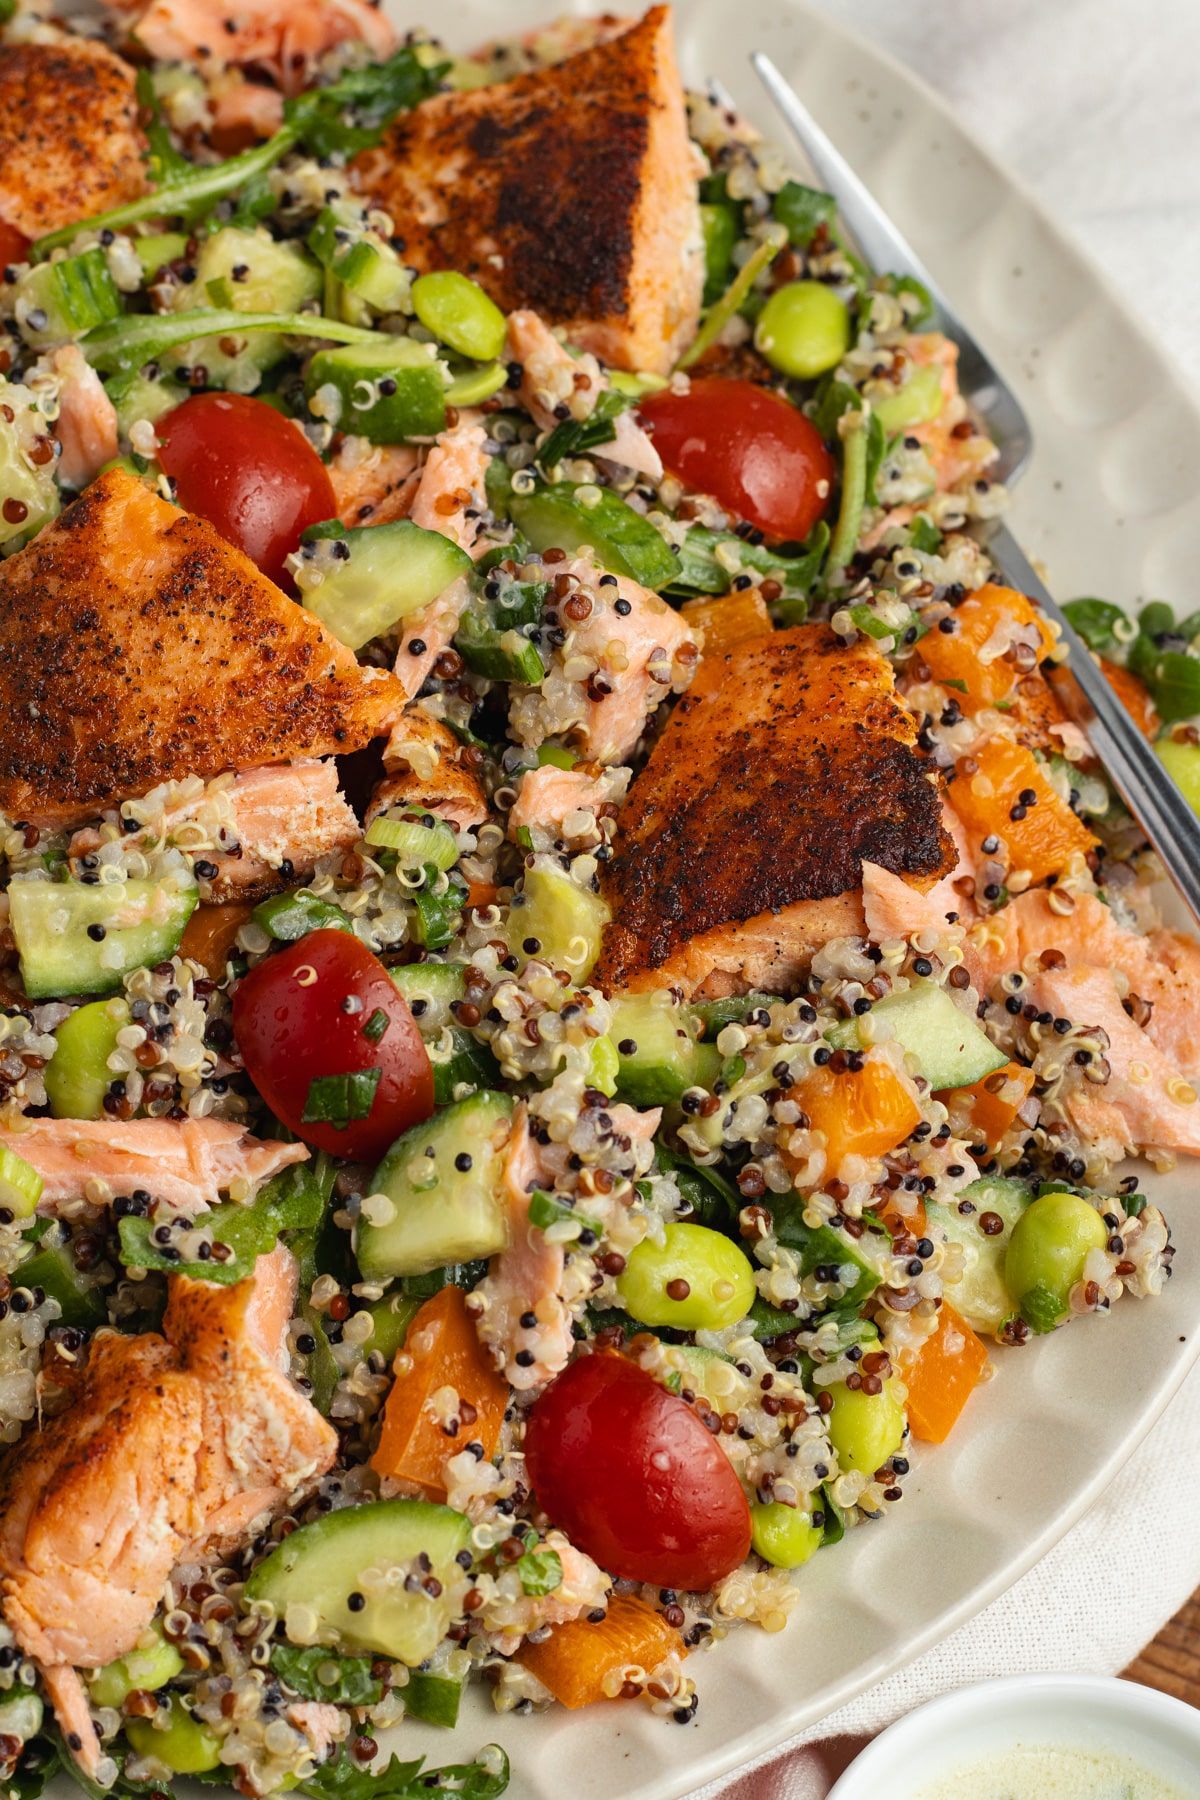 This is a picture of a plate filled with salmon quinoa salad.